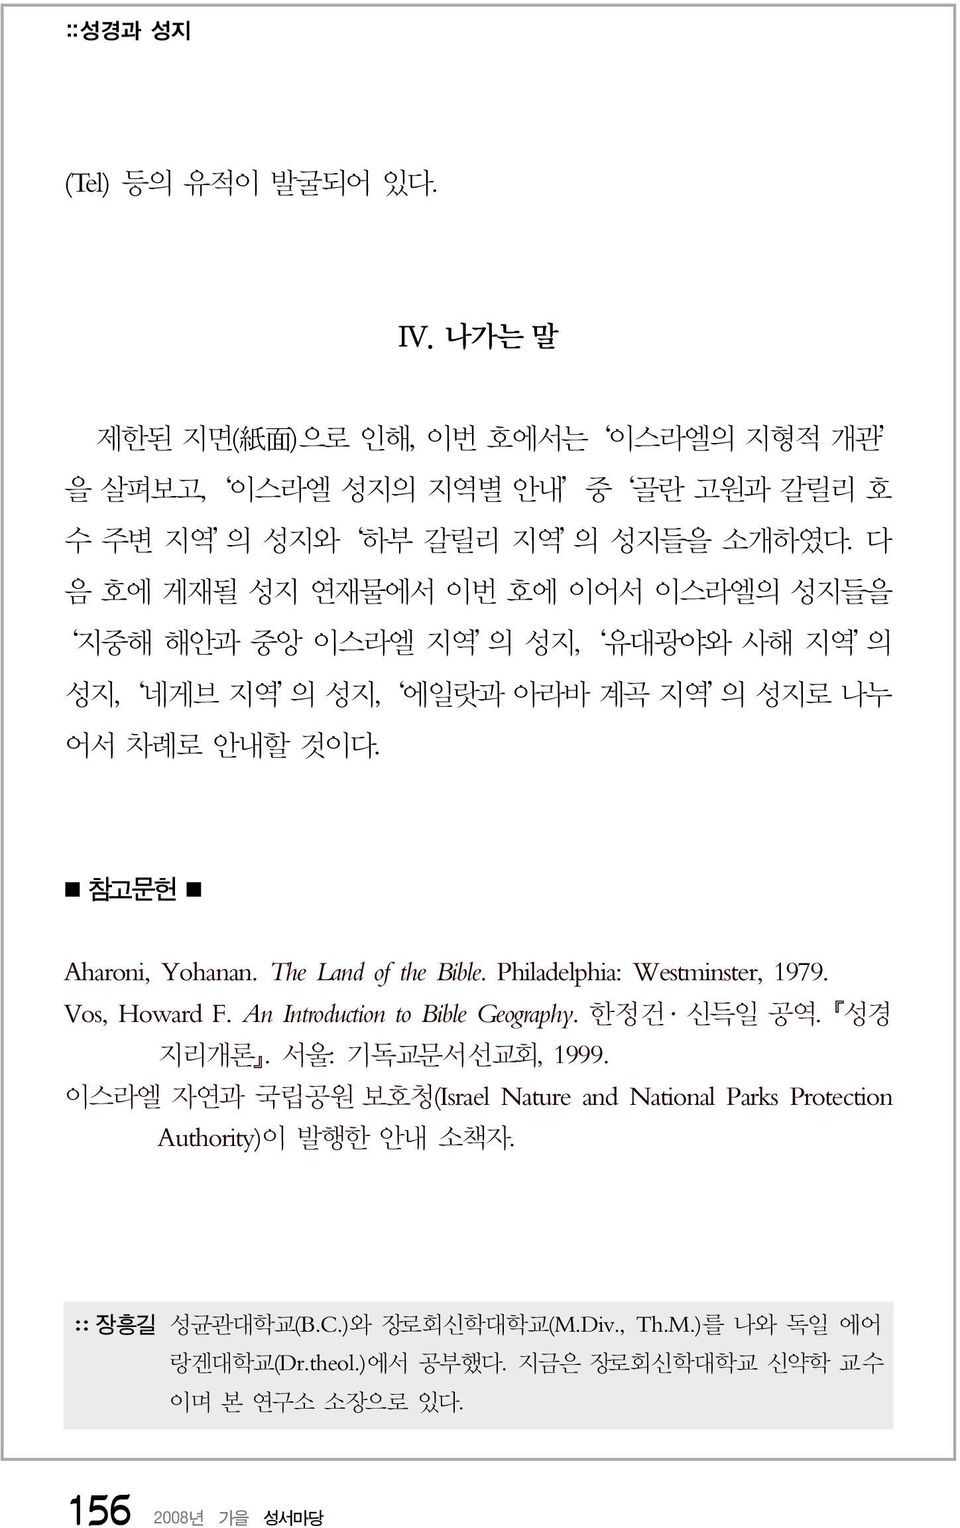 The Land of the Bible. Philadelphia: Westminster, 1979. Vos, Howard F. An Introduction to Bible Geography. 한정건 신득일 공역. 성경 지리개론. 서울: 기독교문서선교회, 1999.